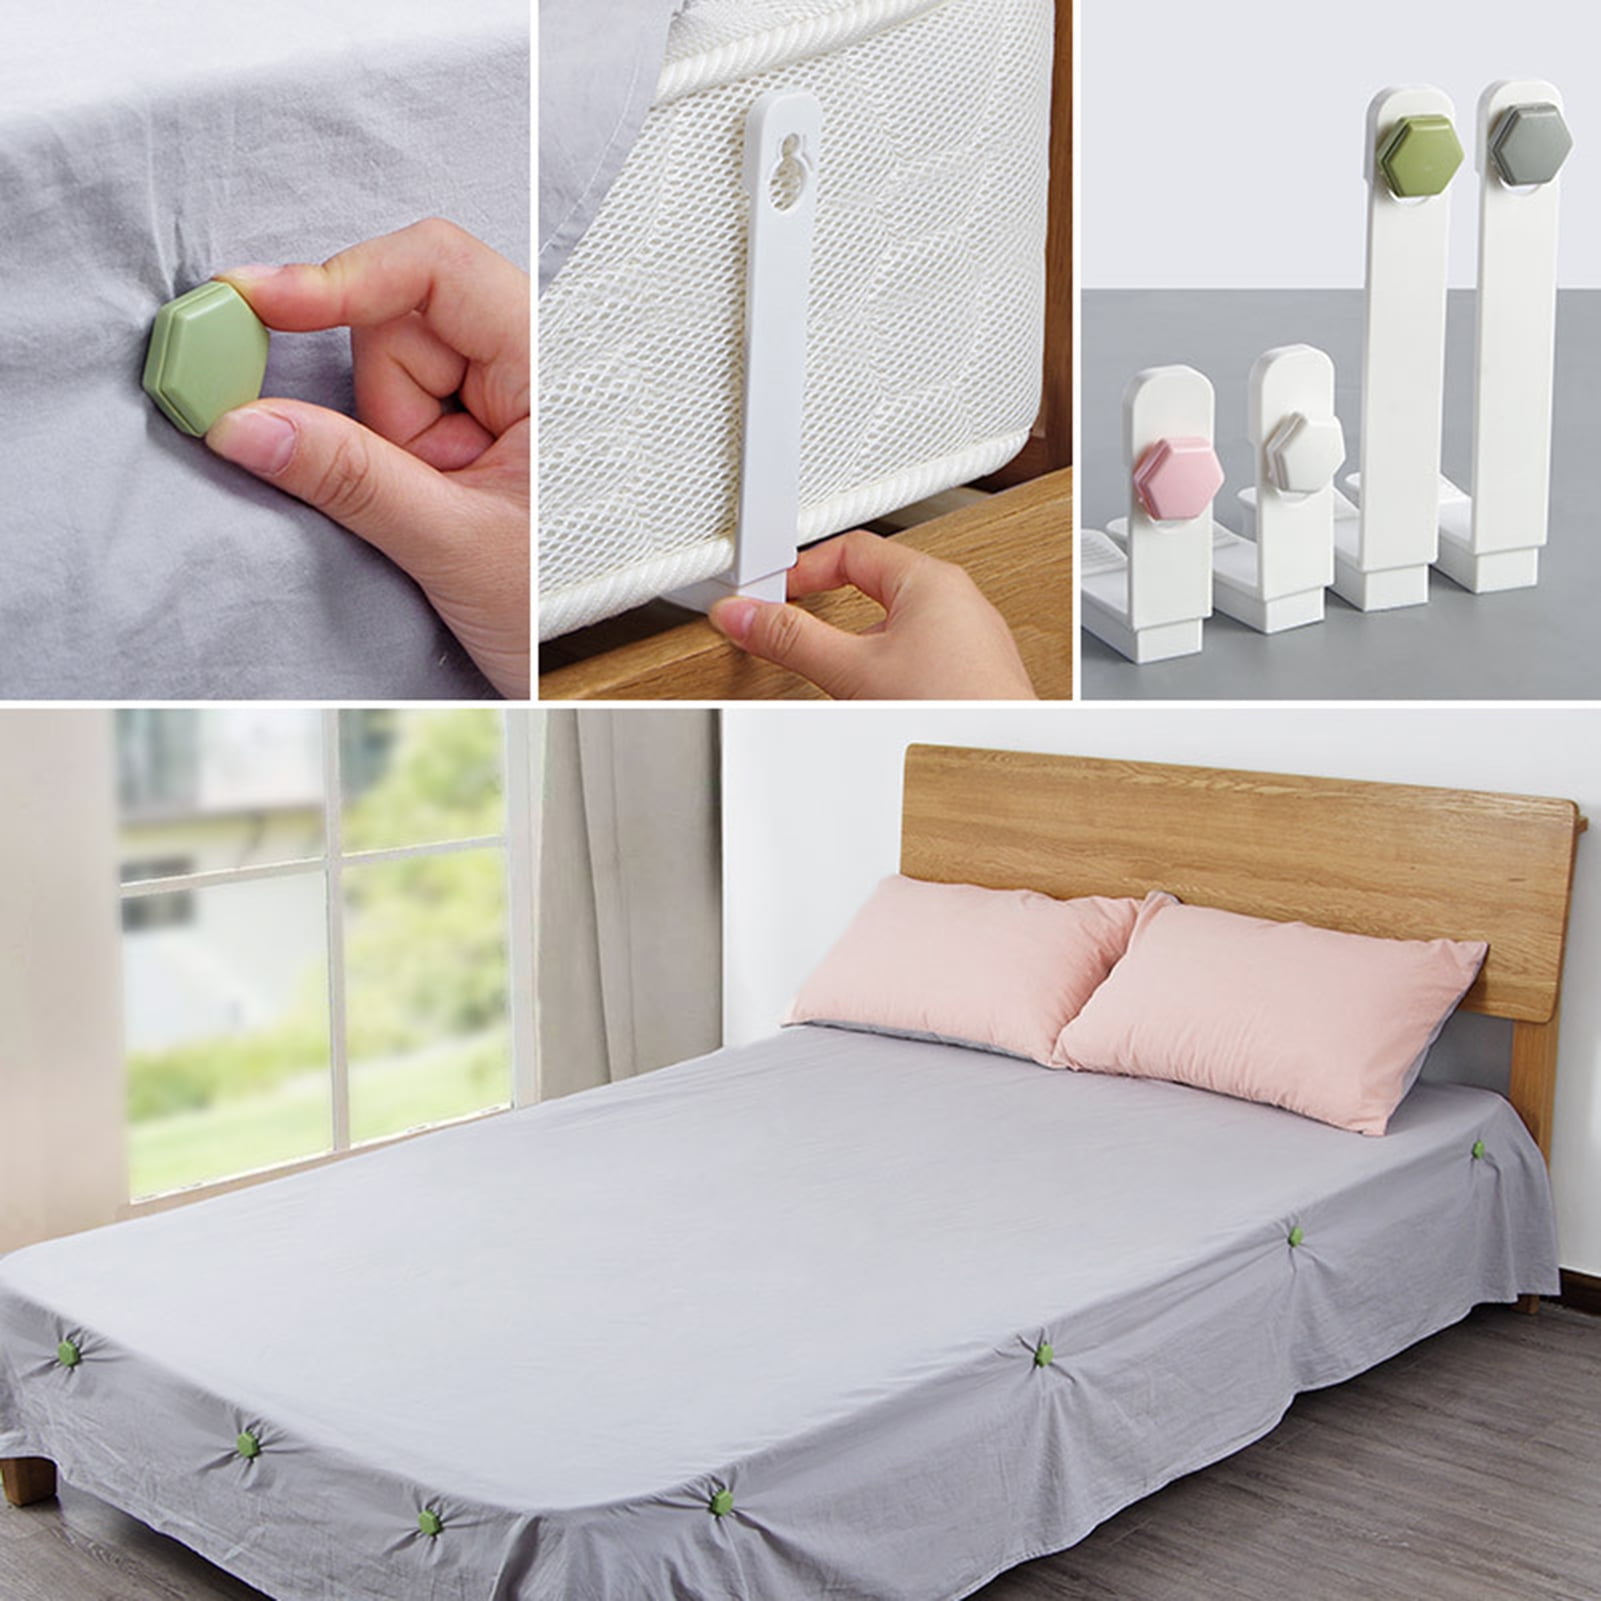 FeelAtHome 8 PCS Bed Sheet Clips Keep Bedsheets In Place-Corner Bands  Suspenders For Fitted Sheets - Mattress Sheets Grippers Holders Straps Fits  From